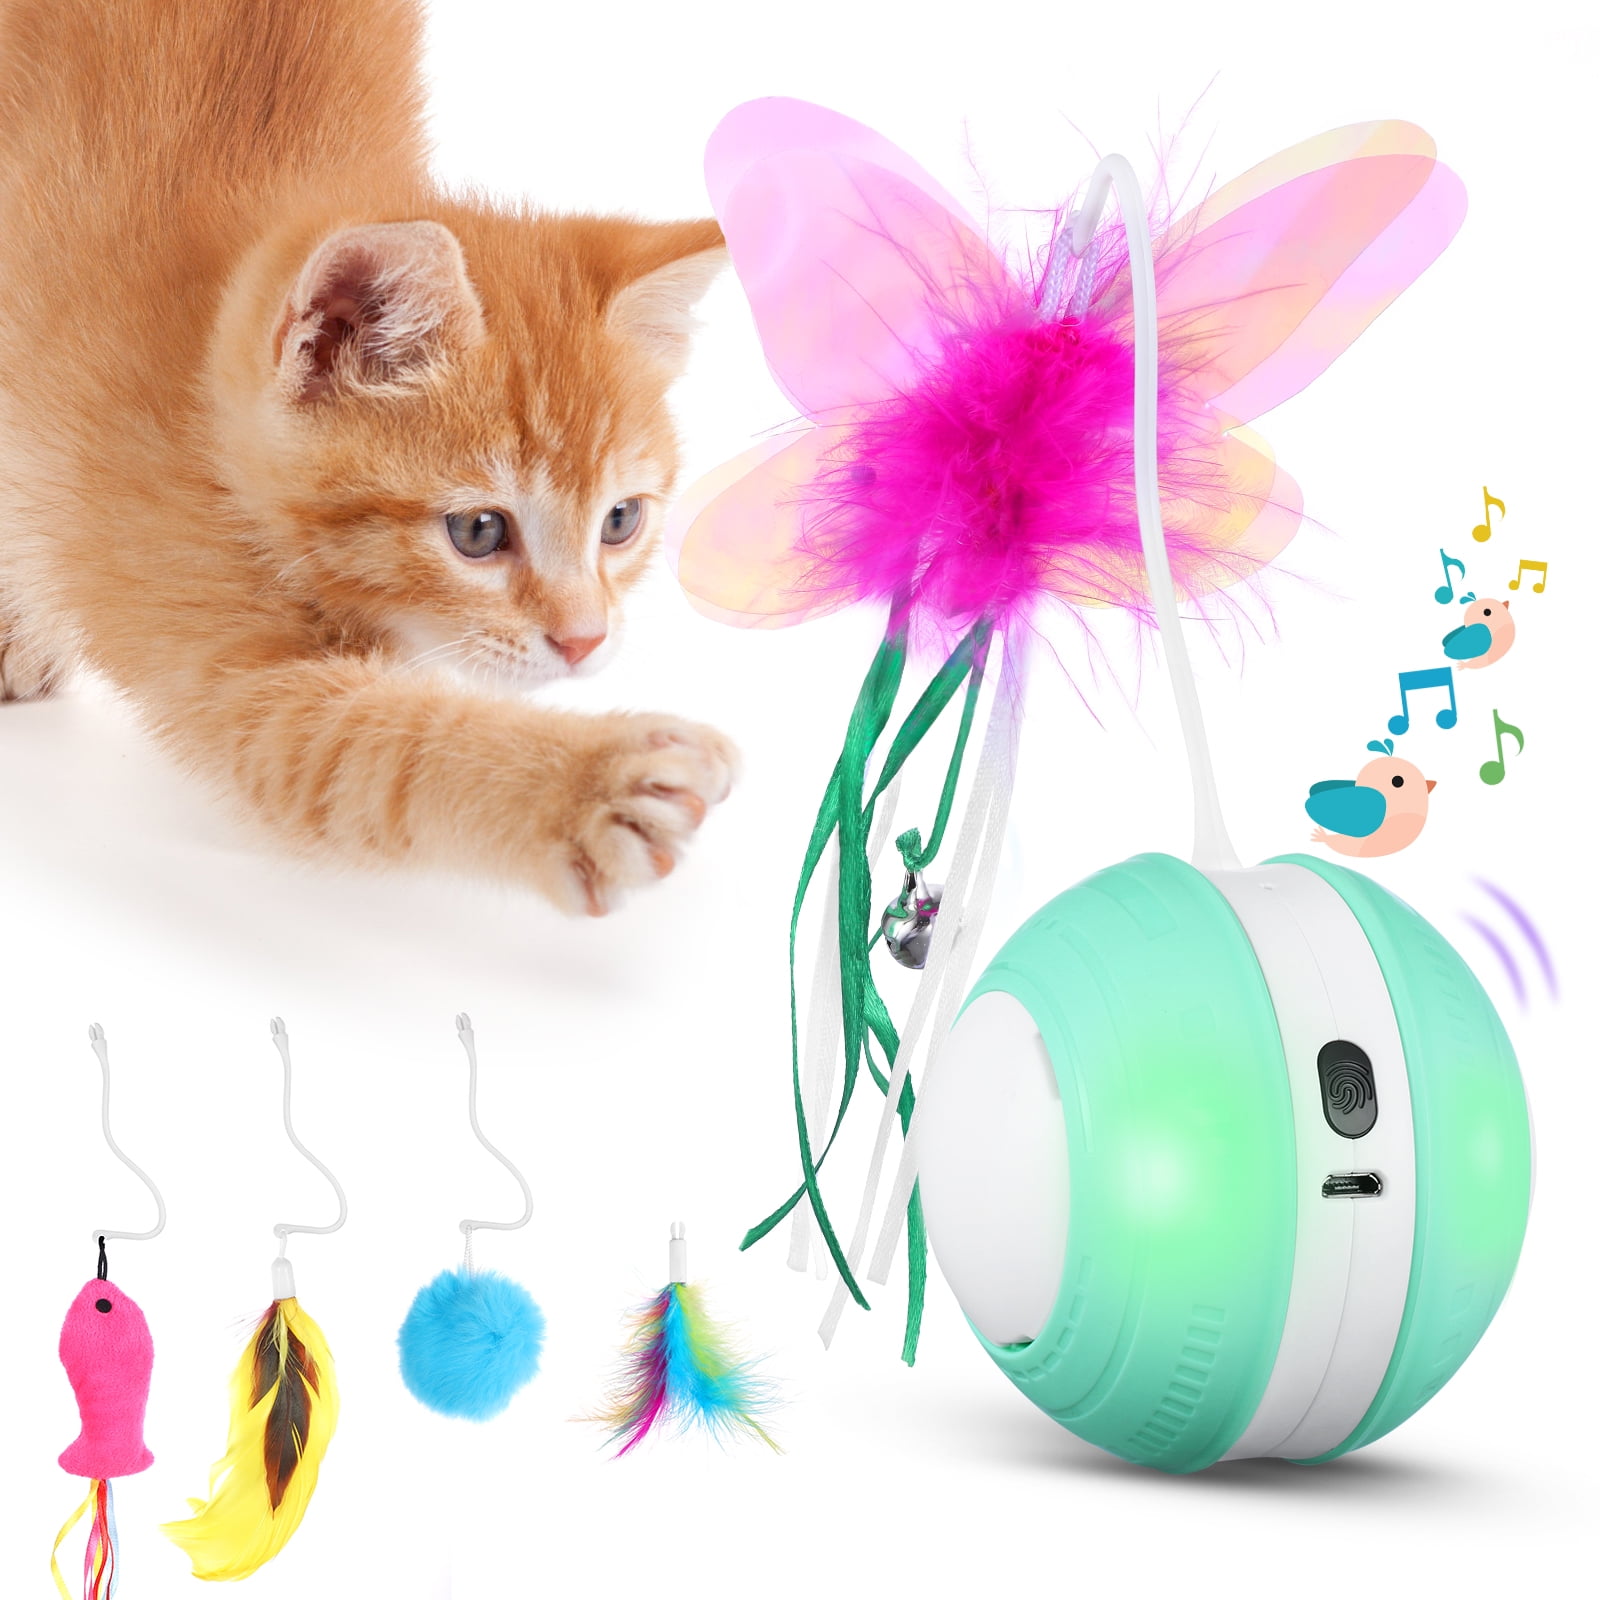 Mouse Tumbler Ball Cute Plastic Kitten Game Long Feather Cat Toy Pet Supplies 